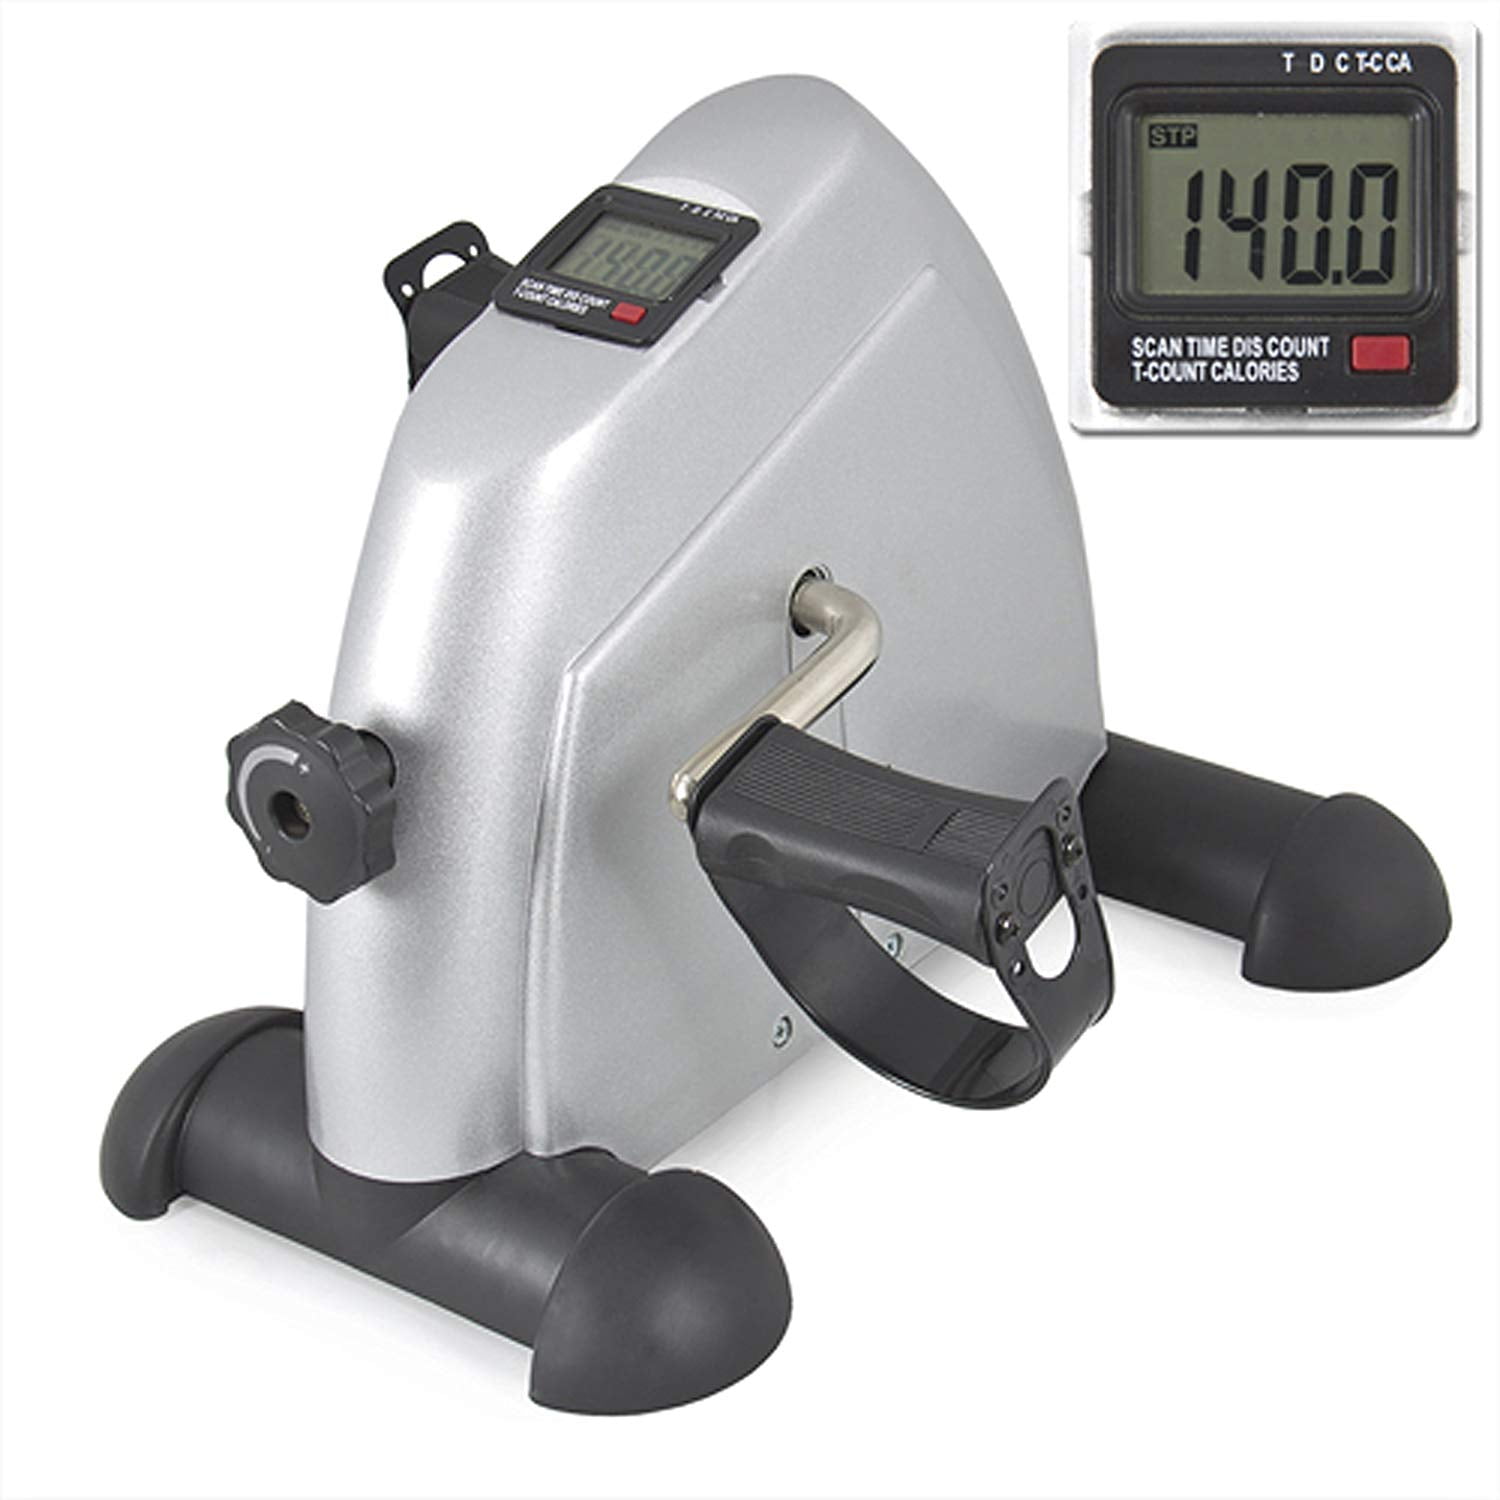 Details about   Mini Fitness Pedal Exerciser Bike Leg/Arm Exercise Cycle w/ LCD Display Home Gym 